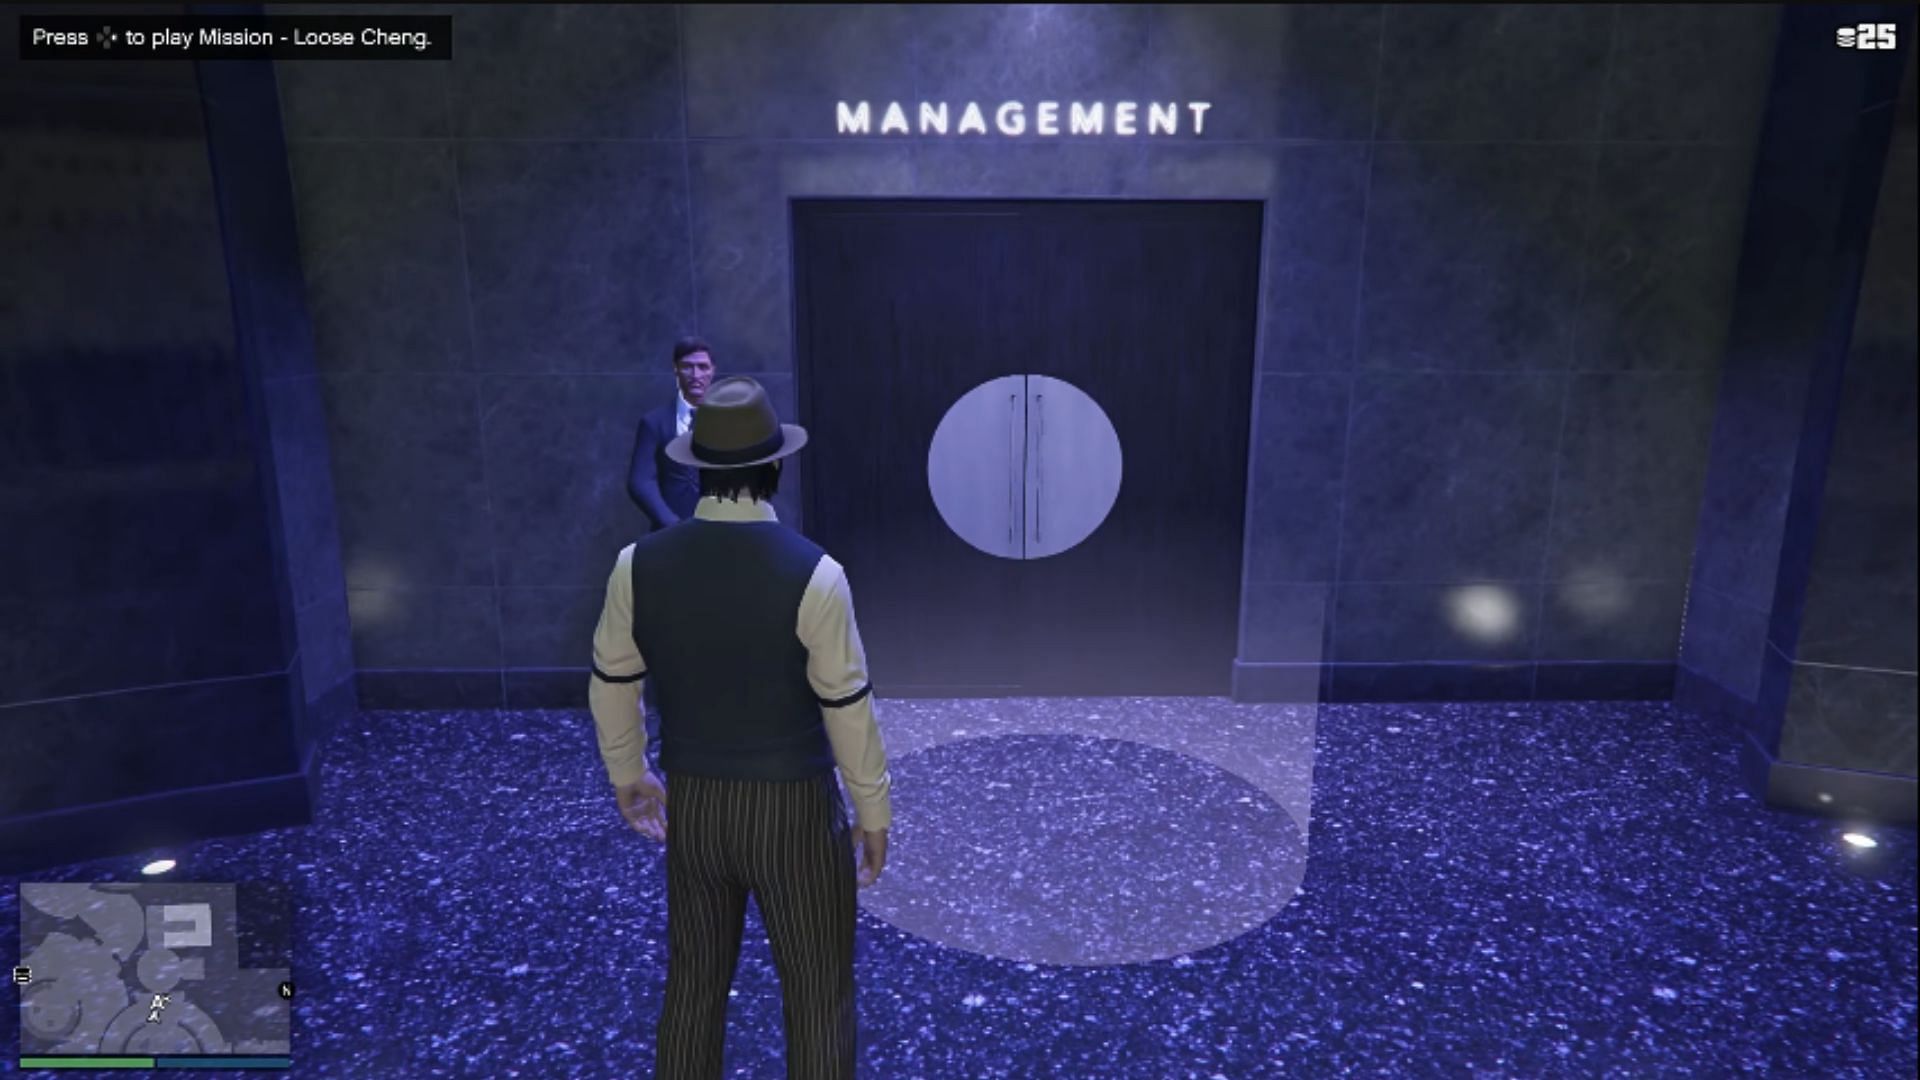 The Casino Story Missions can be started from here (Image via YouTube/Gamers Heroes)